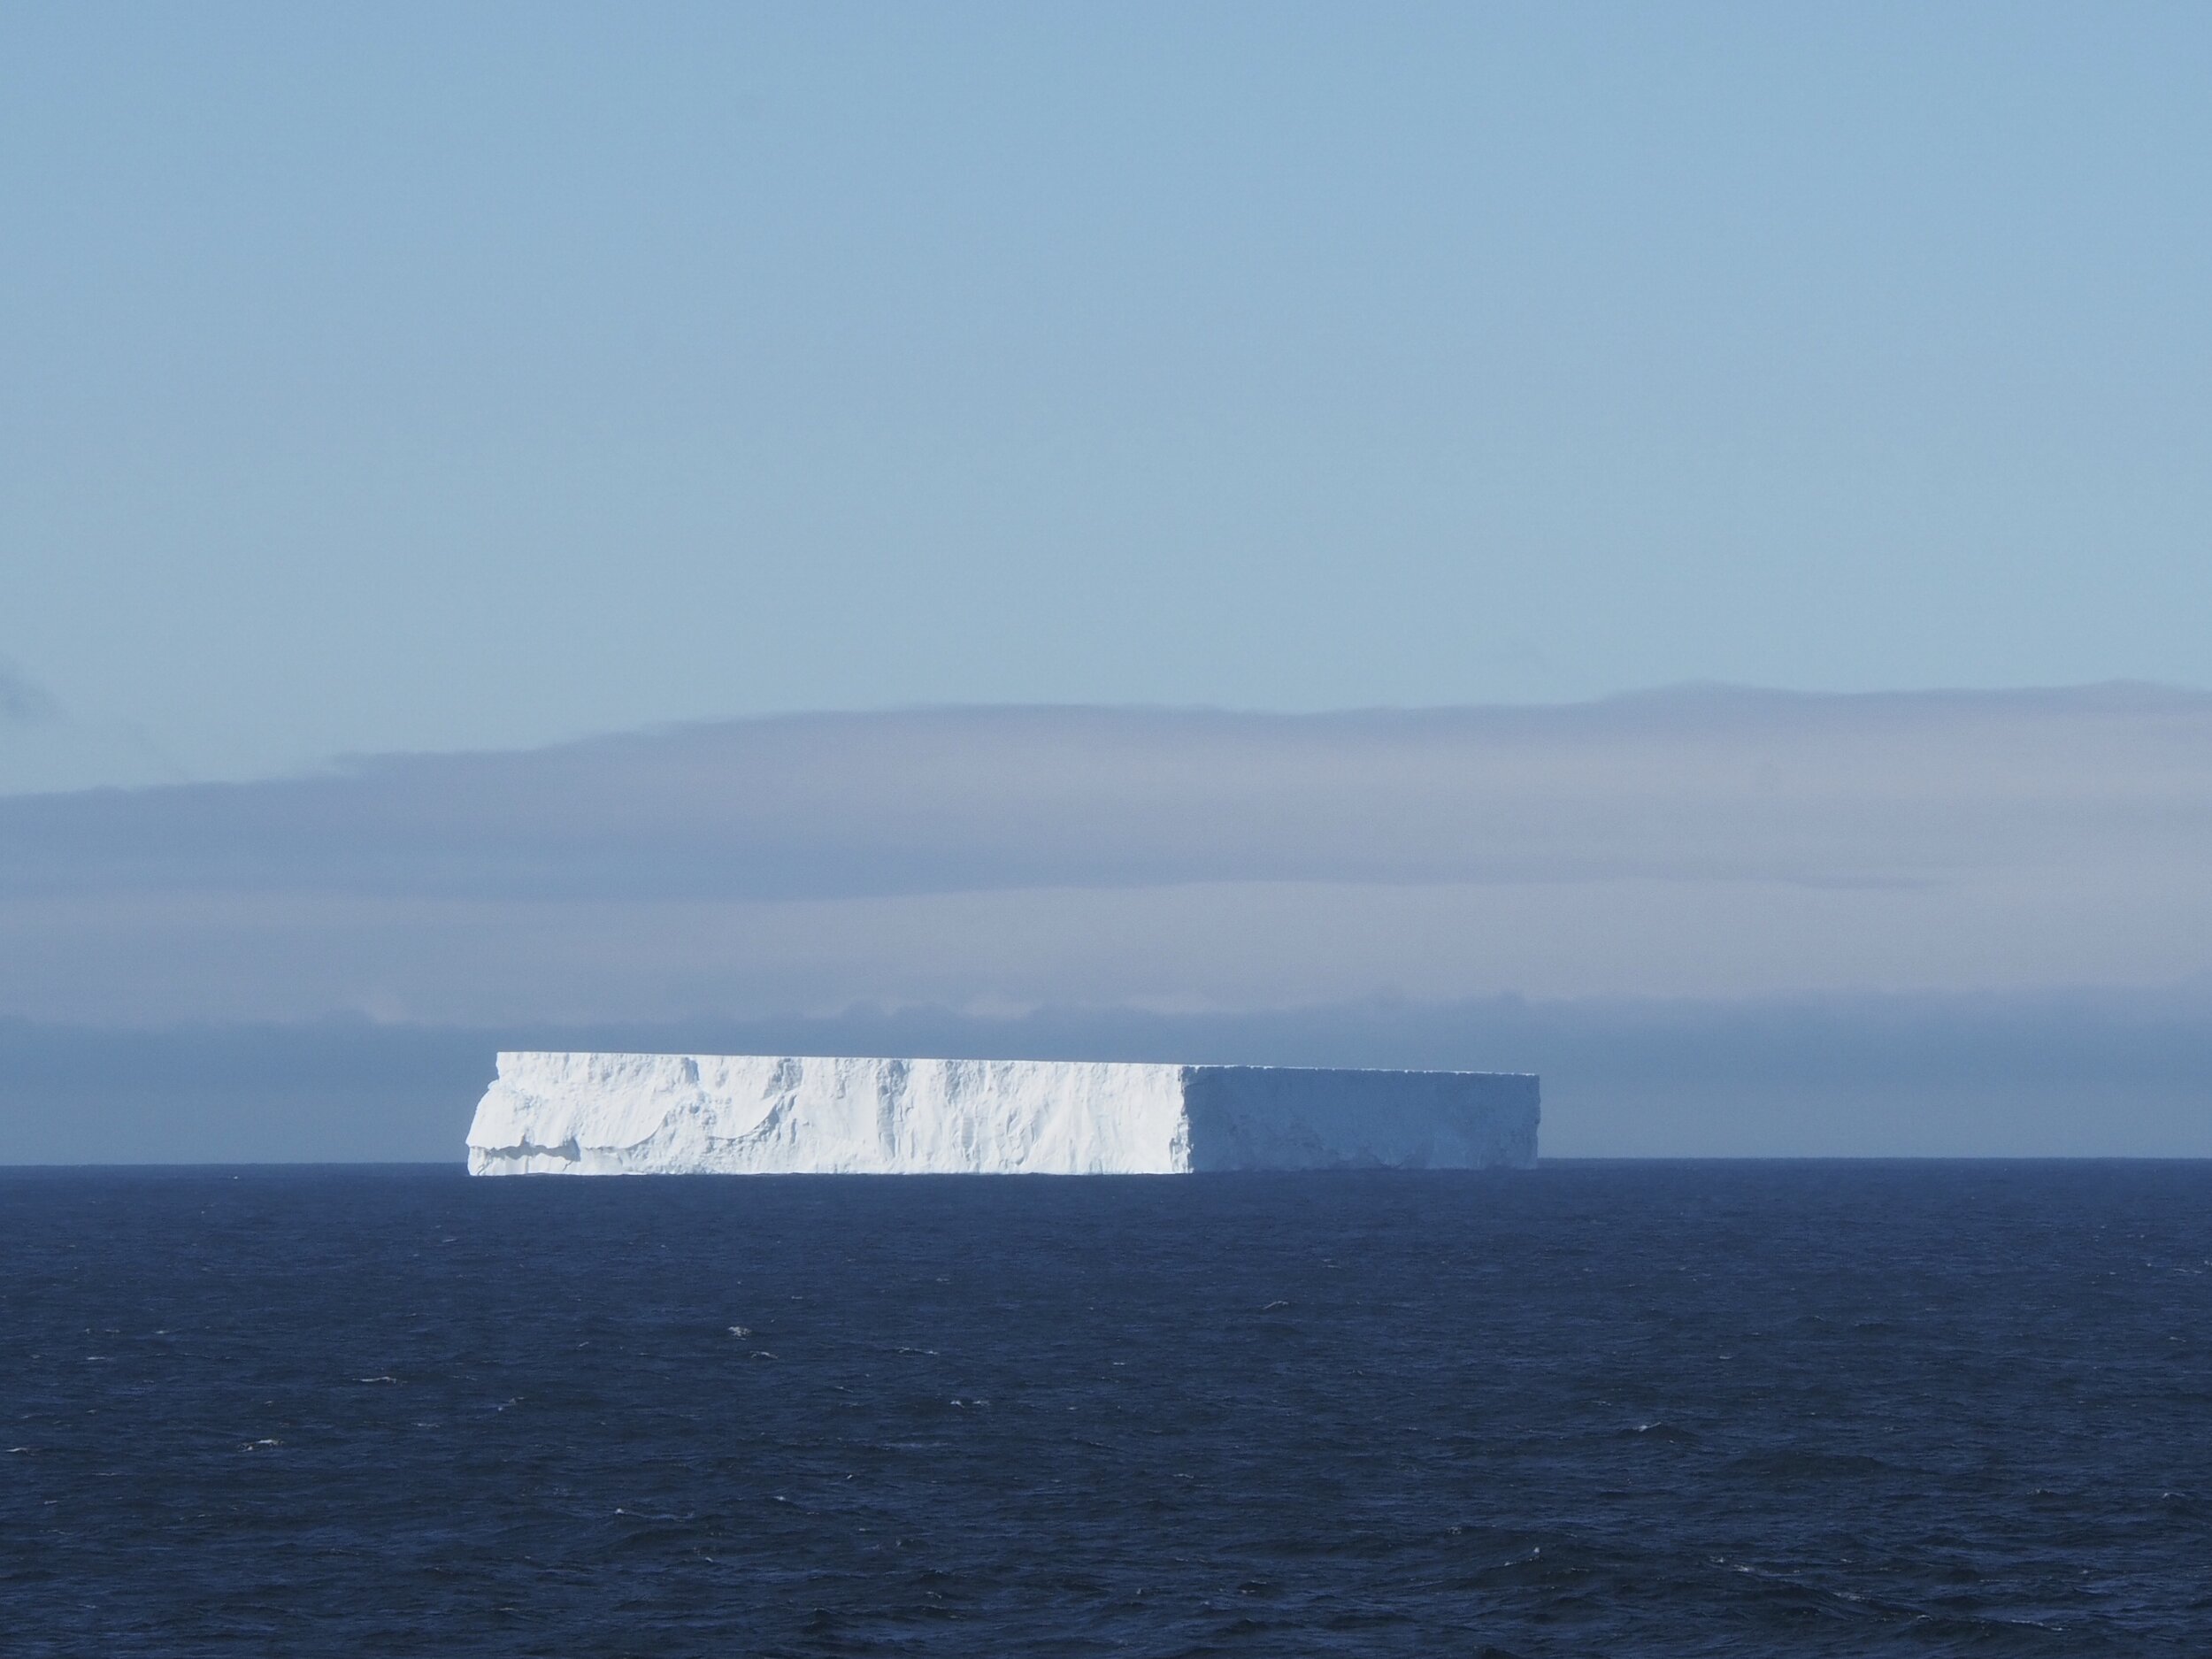 Our first magnificent iceberg